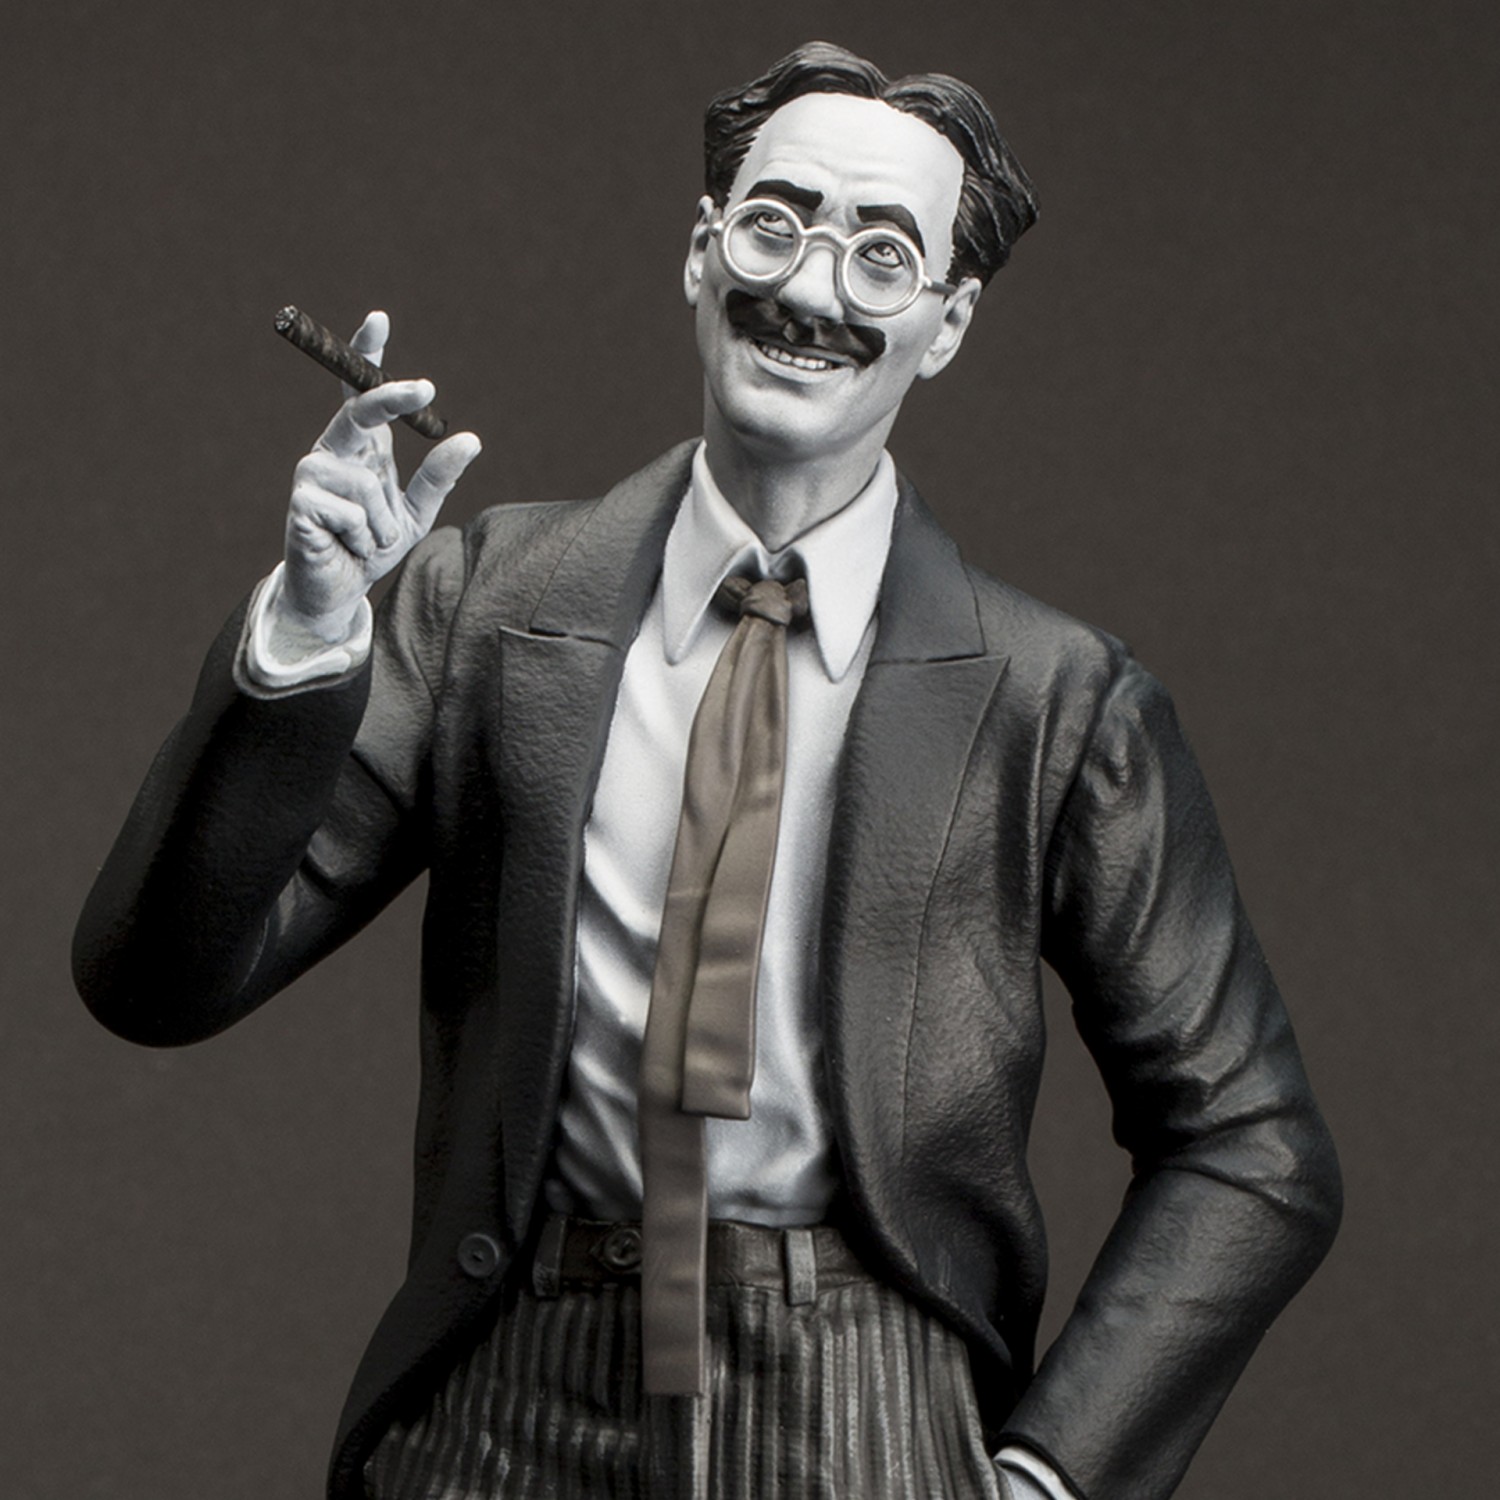 The statue to celebrate the myth of Groucho Marx - 13